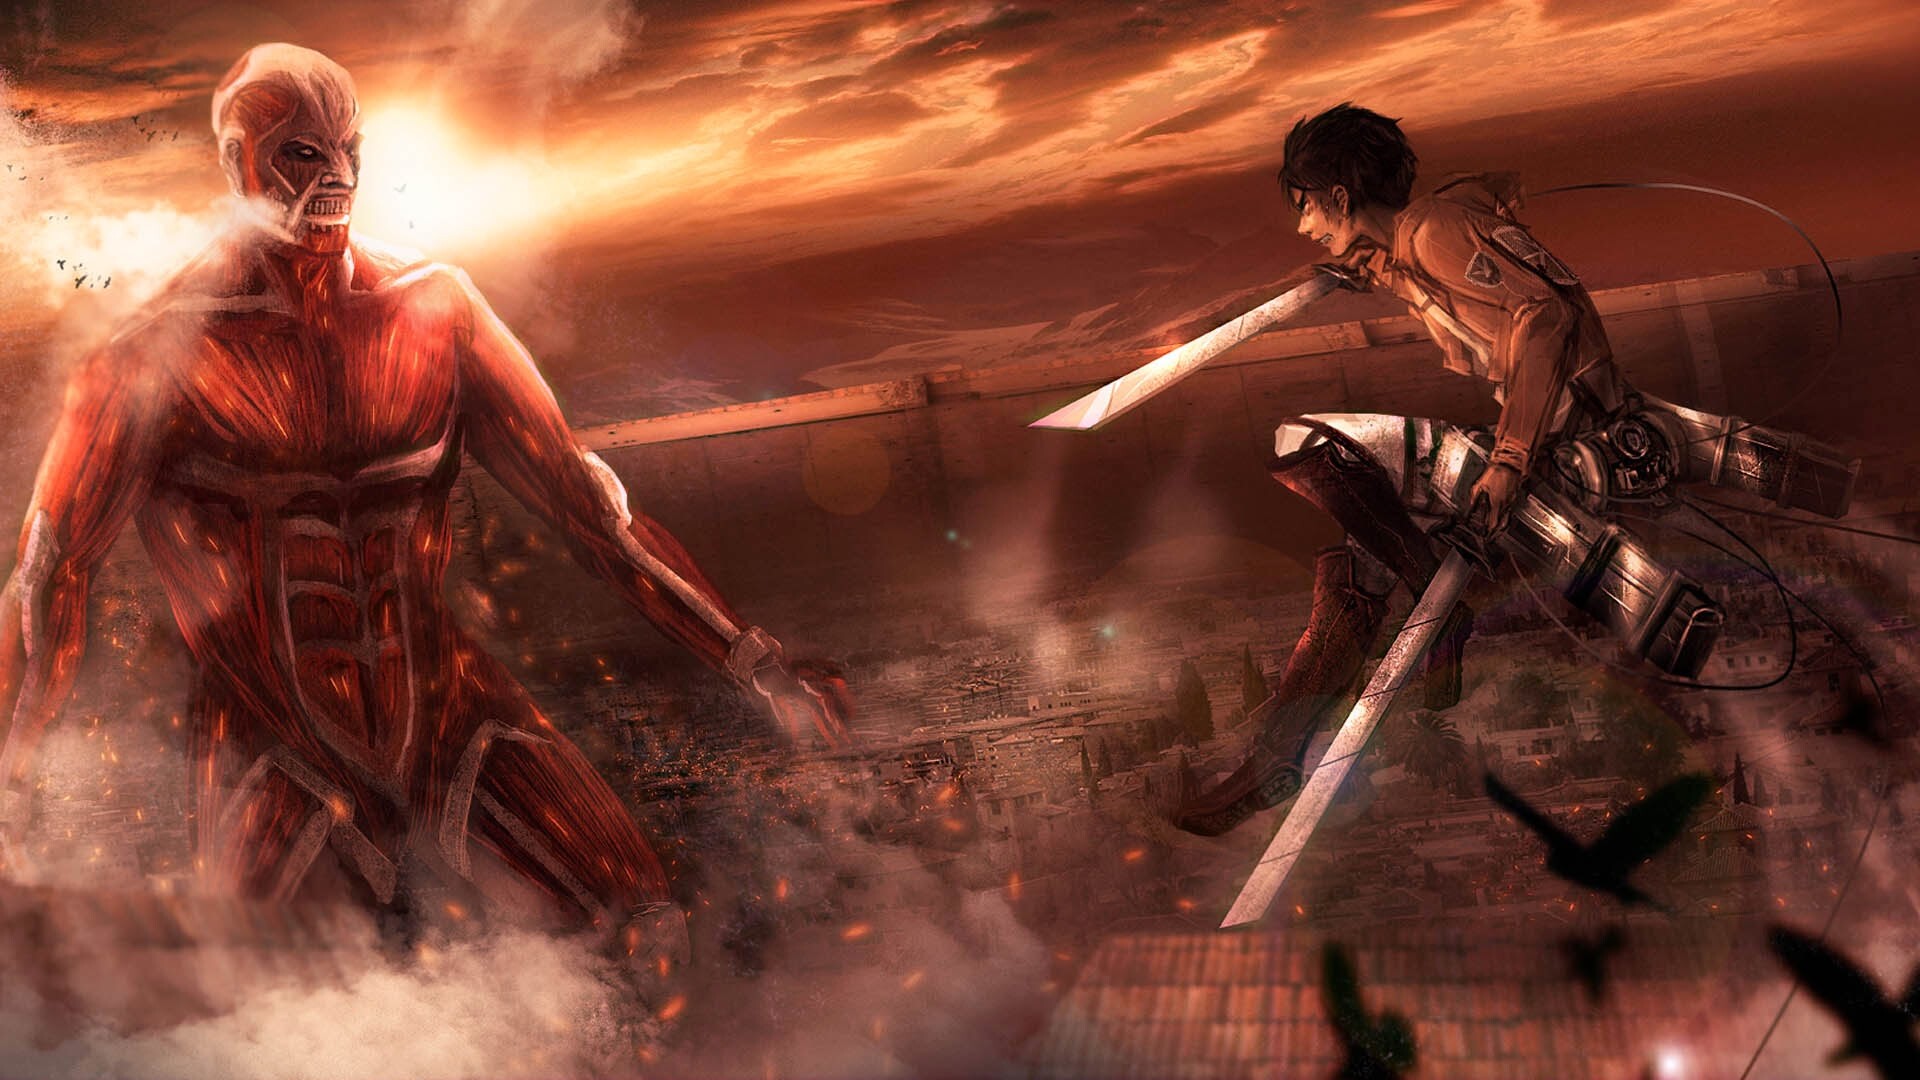 Attack on Titan (TV Series): AOT, Set in a city surrounded by a series of circular walls. 1920x1080 Full HD Background.